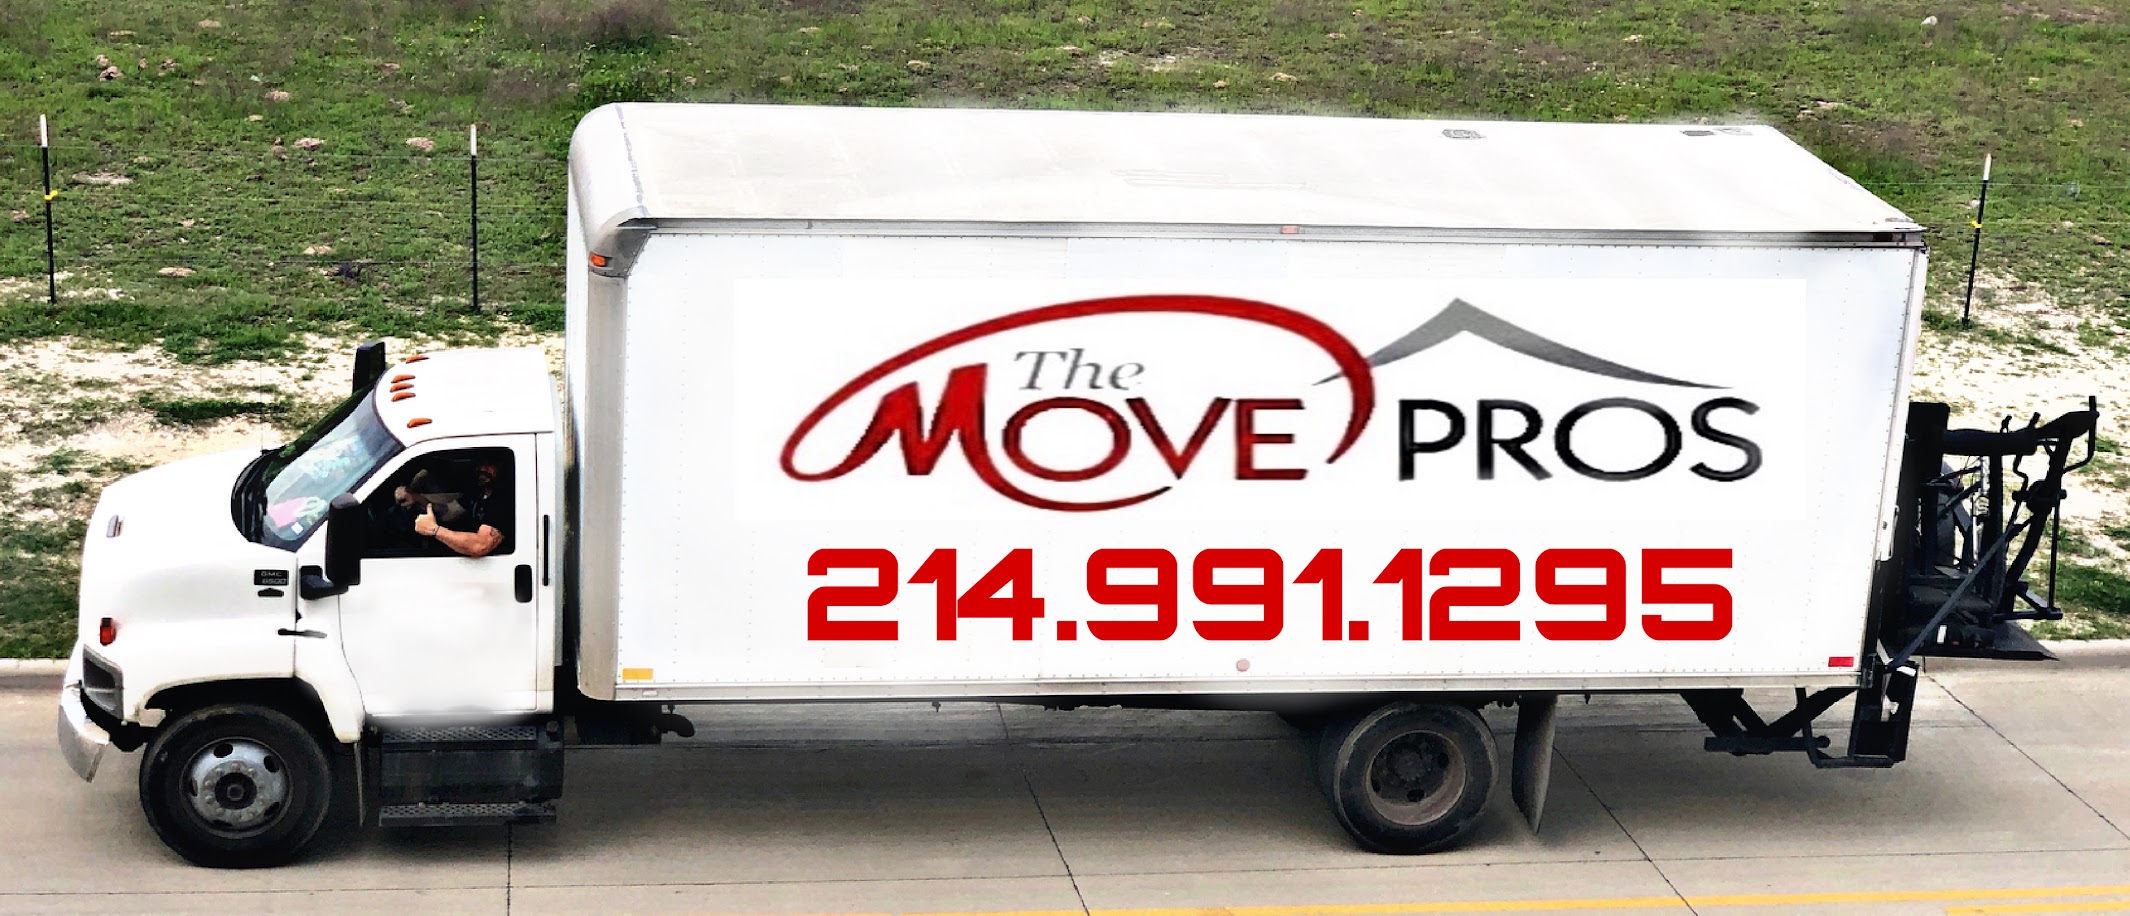 The Move Pros